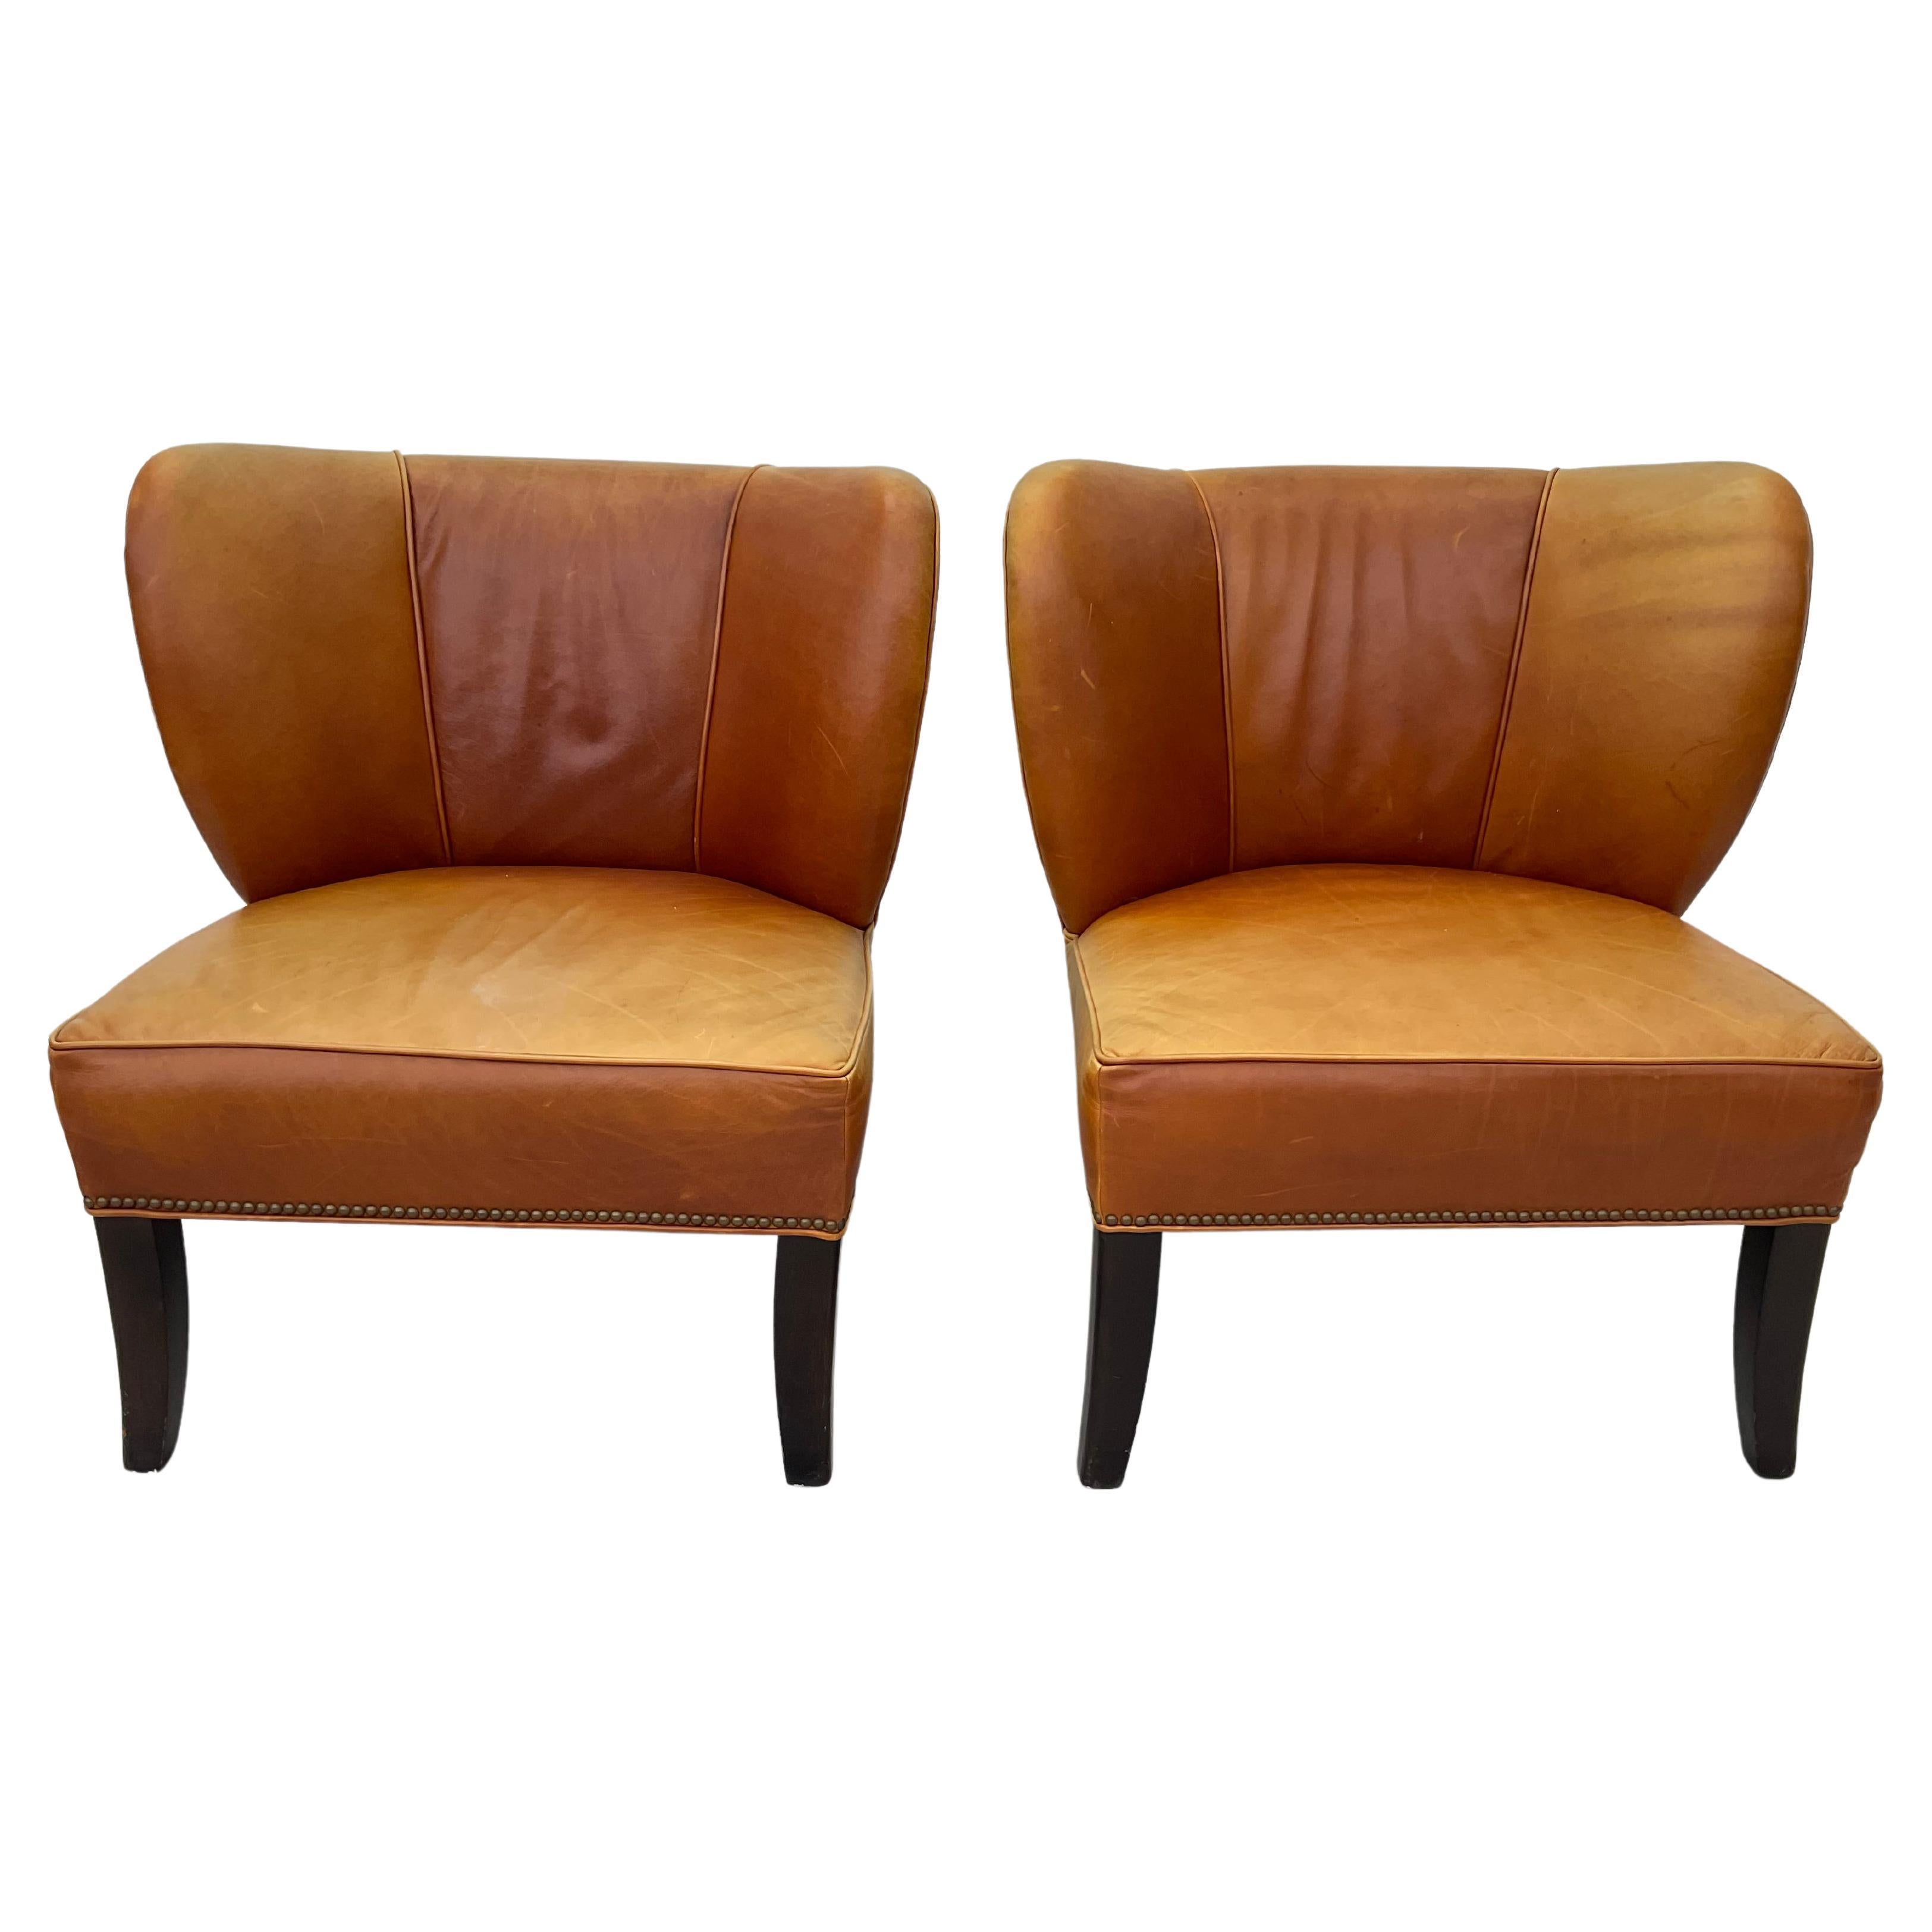 Pair Of Arhaus Italian Leather Lounge Chairs For Sale 4